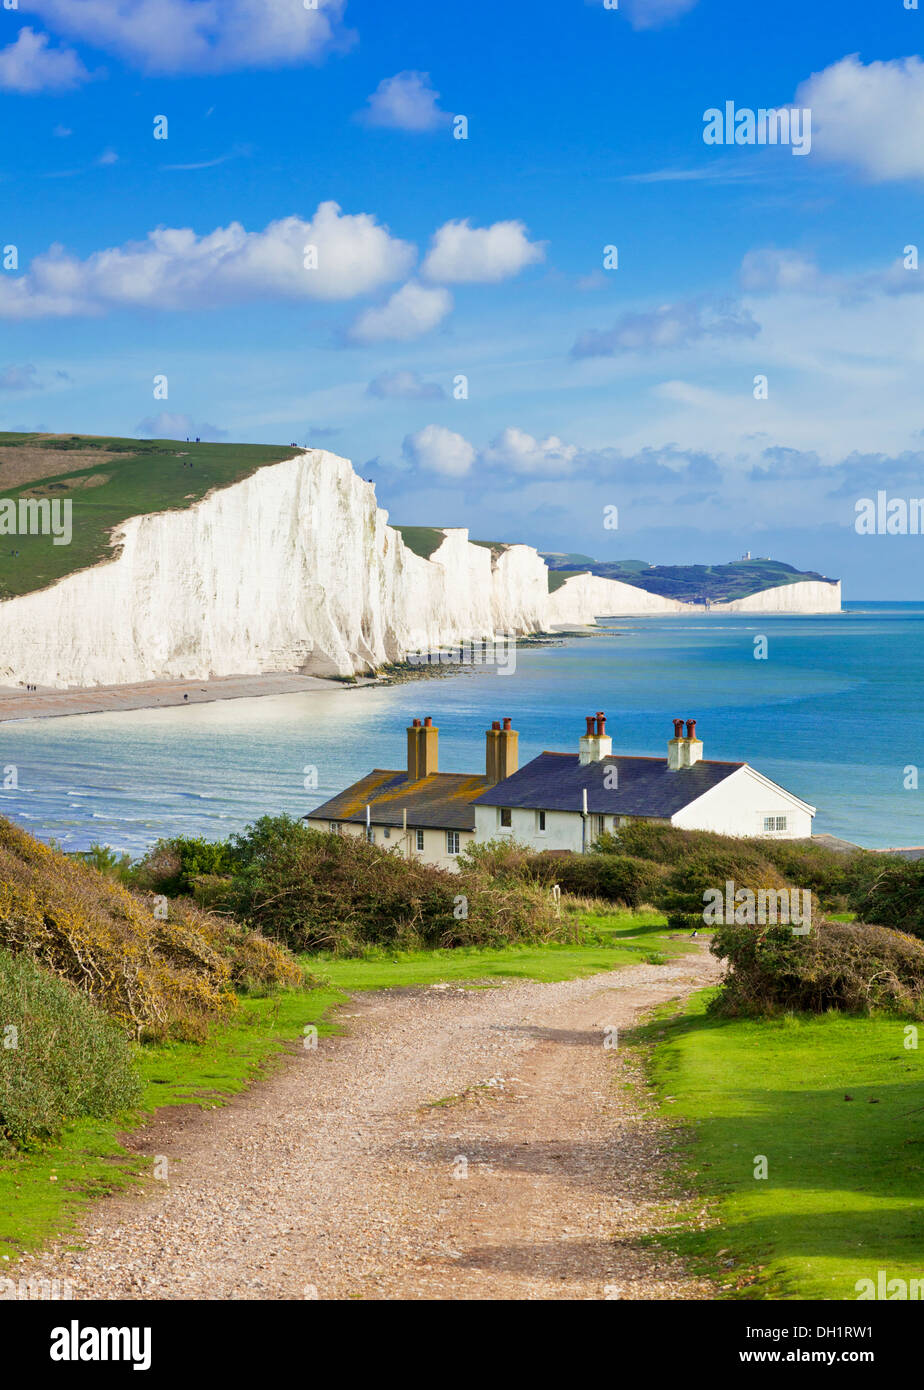 The Seven Sisters Cliffs, the Coastguard Cottages South Downs Way, South Downs National Park, East Sussex, England, UK, GB, Europa Stockfoto